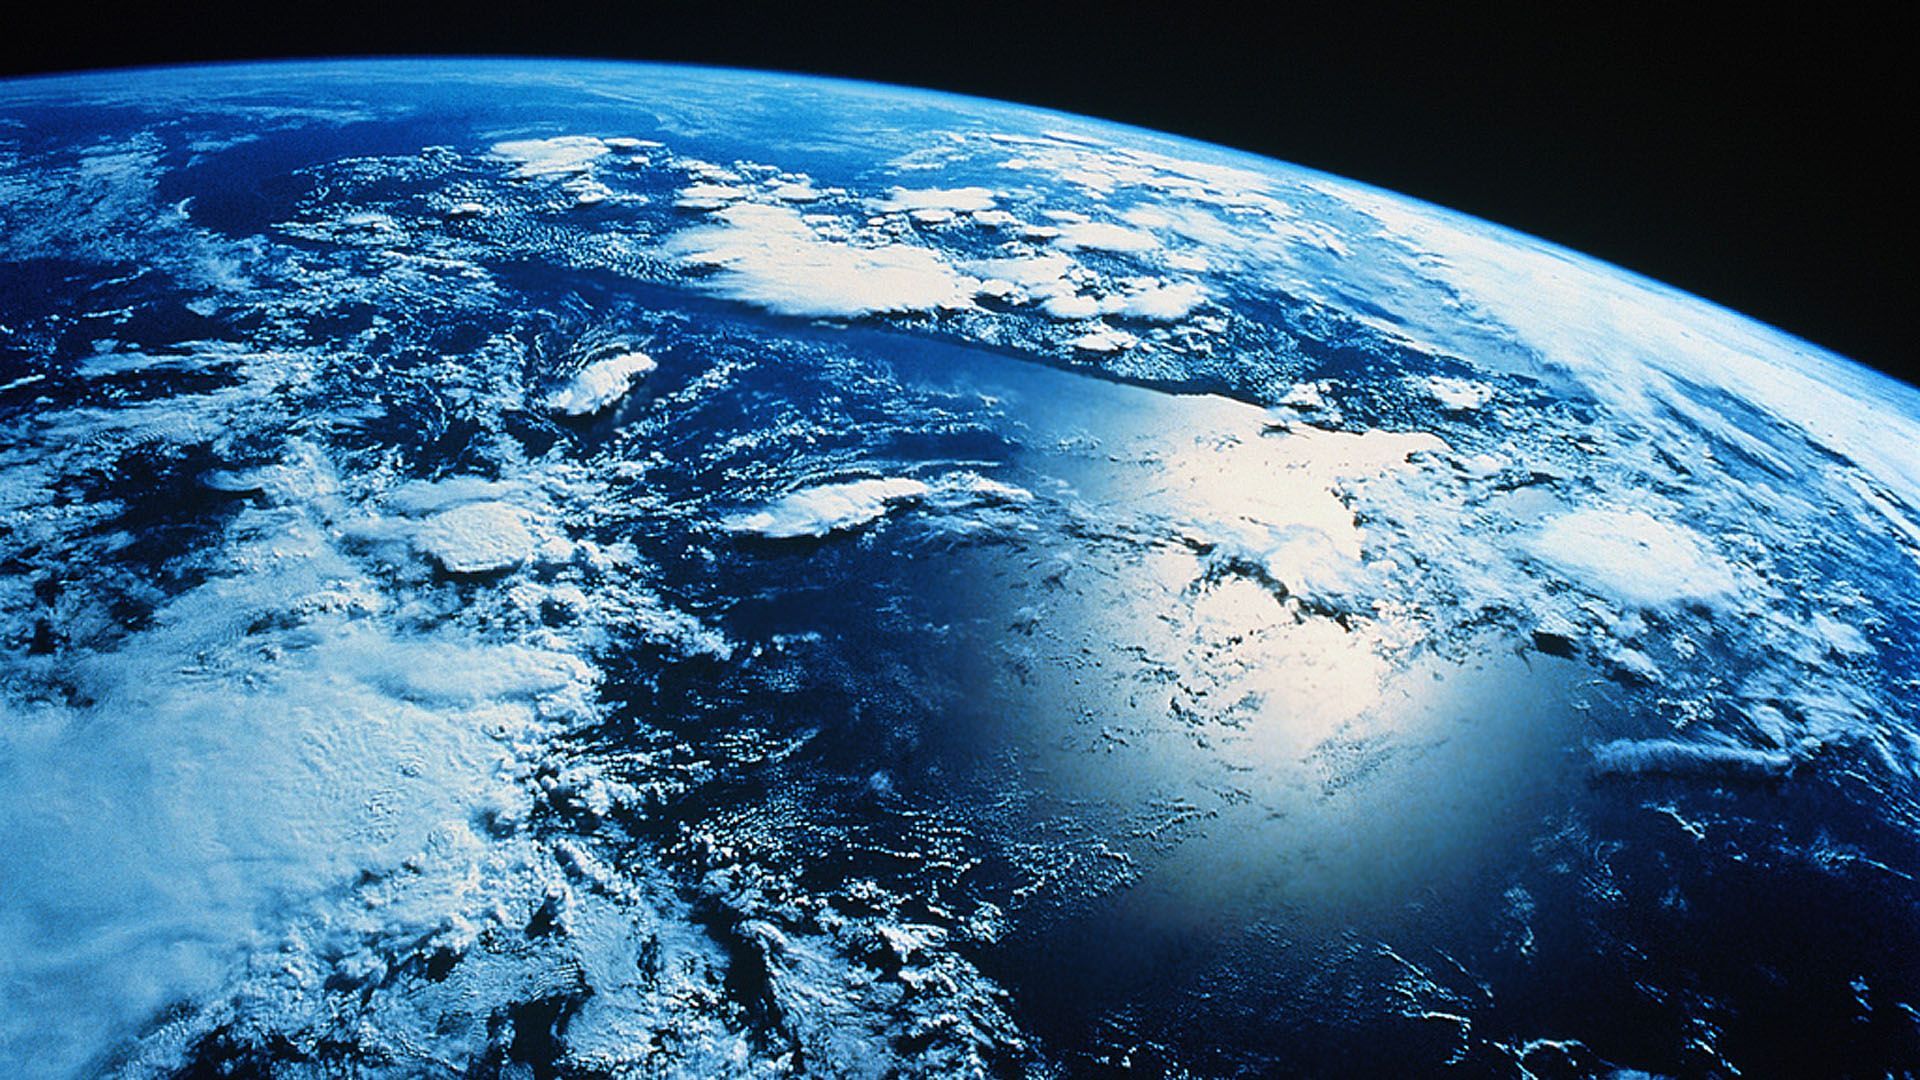 Earth From Space Hd - wallpaper.